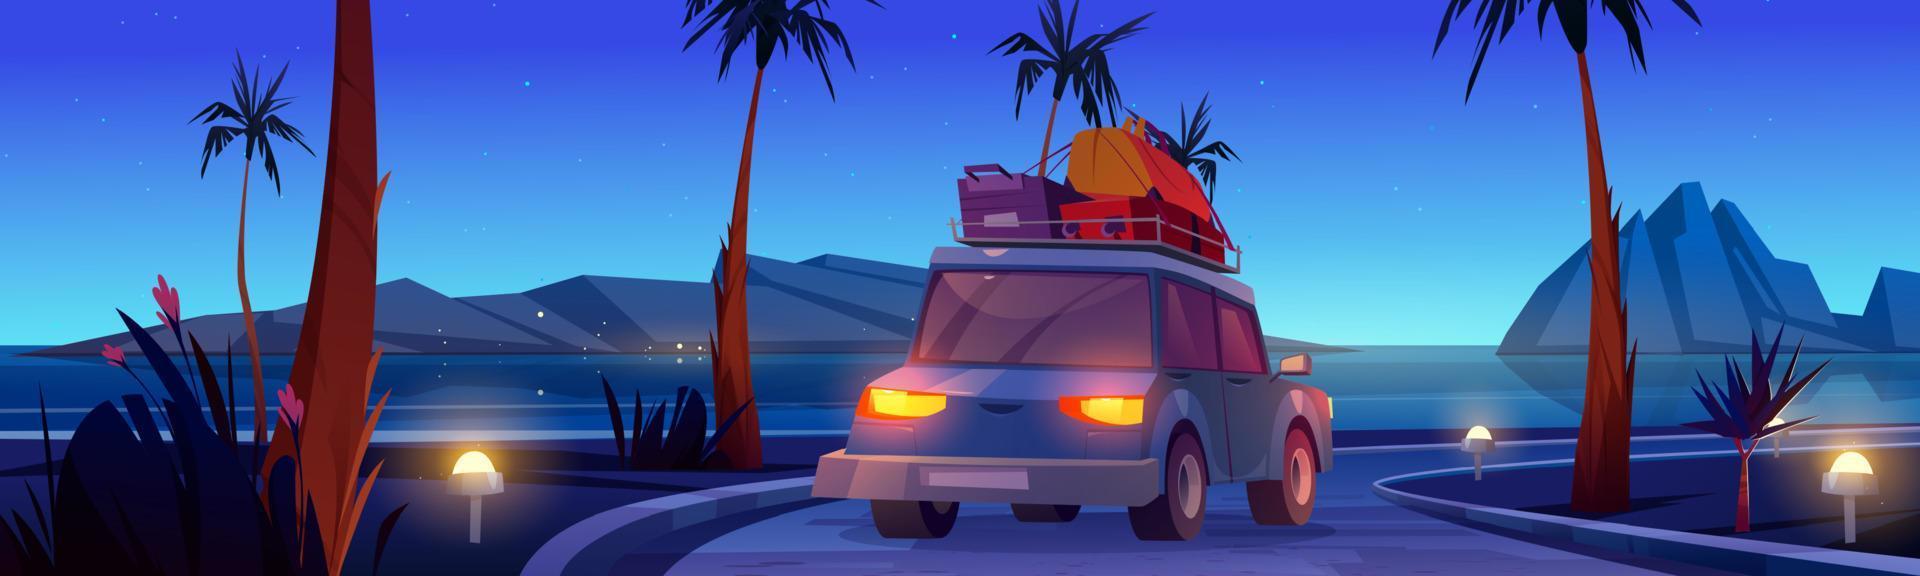 Car drive on road on sea beach at night vector